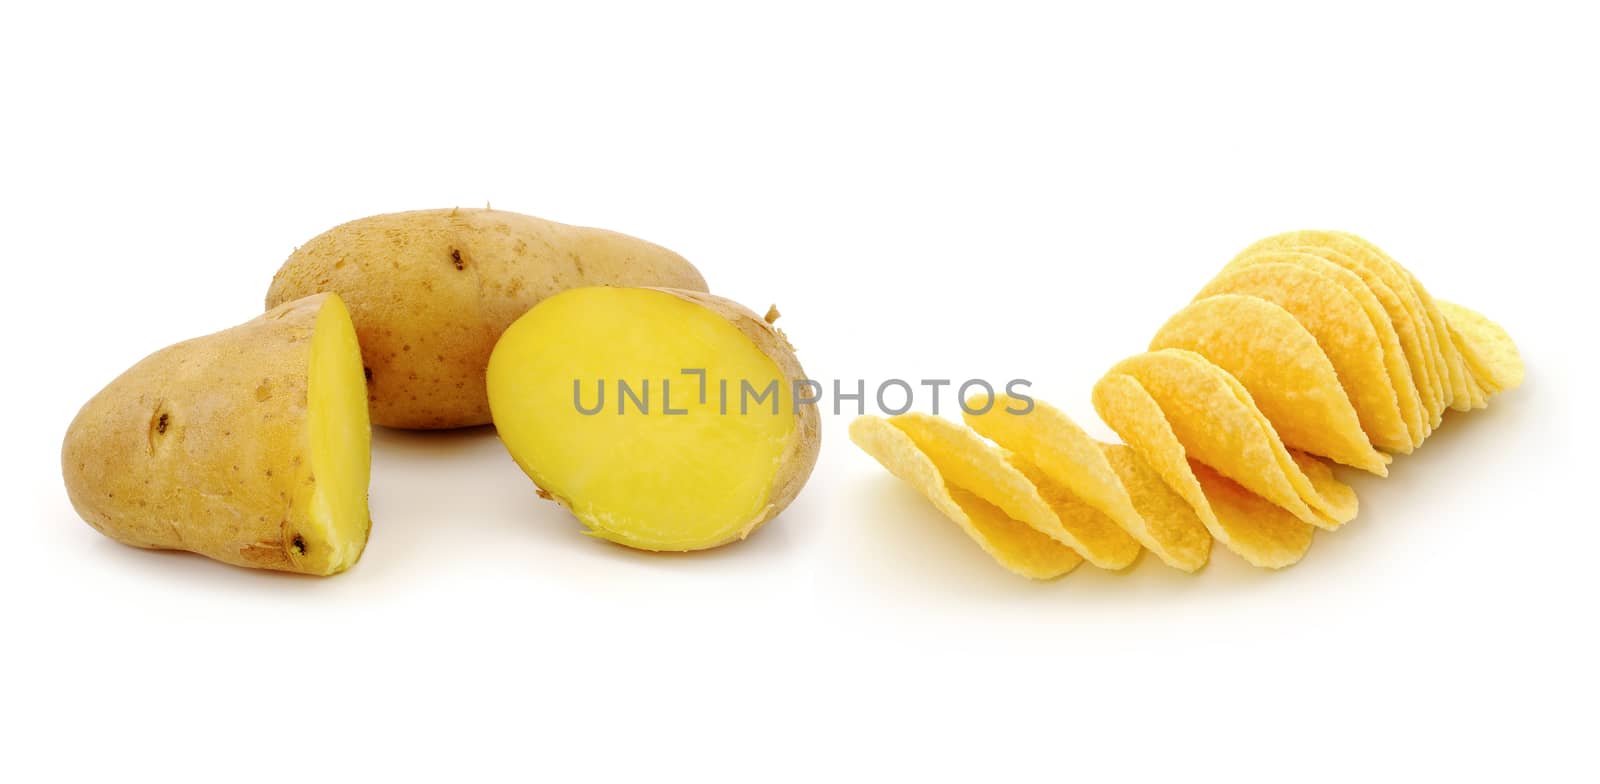 potato and Potato chips isolated on white background  by sommai